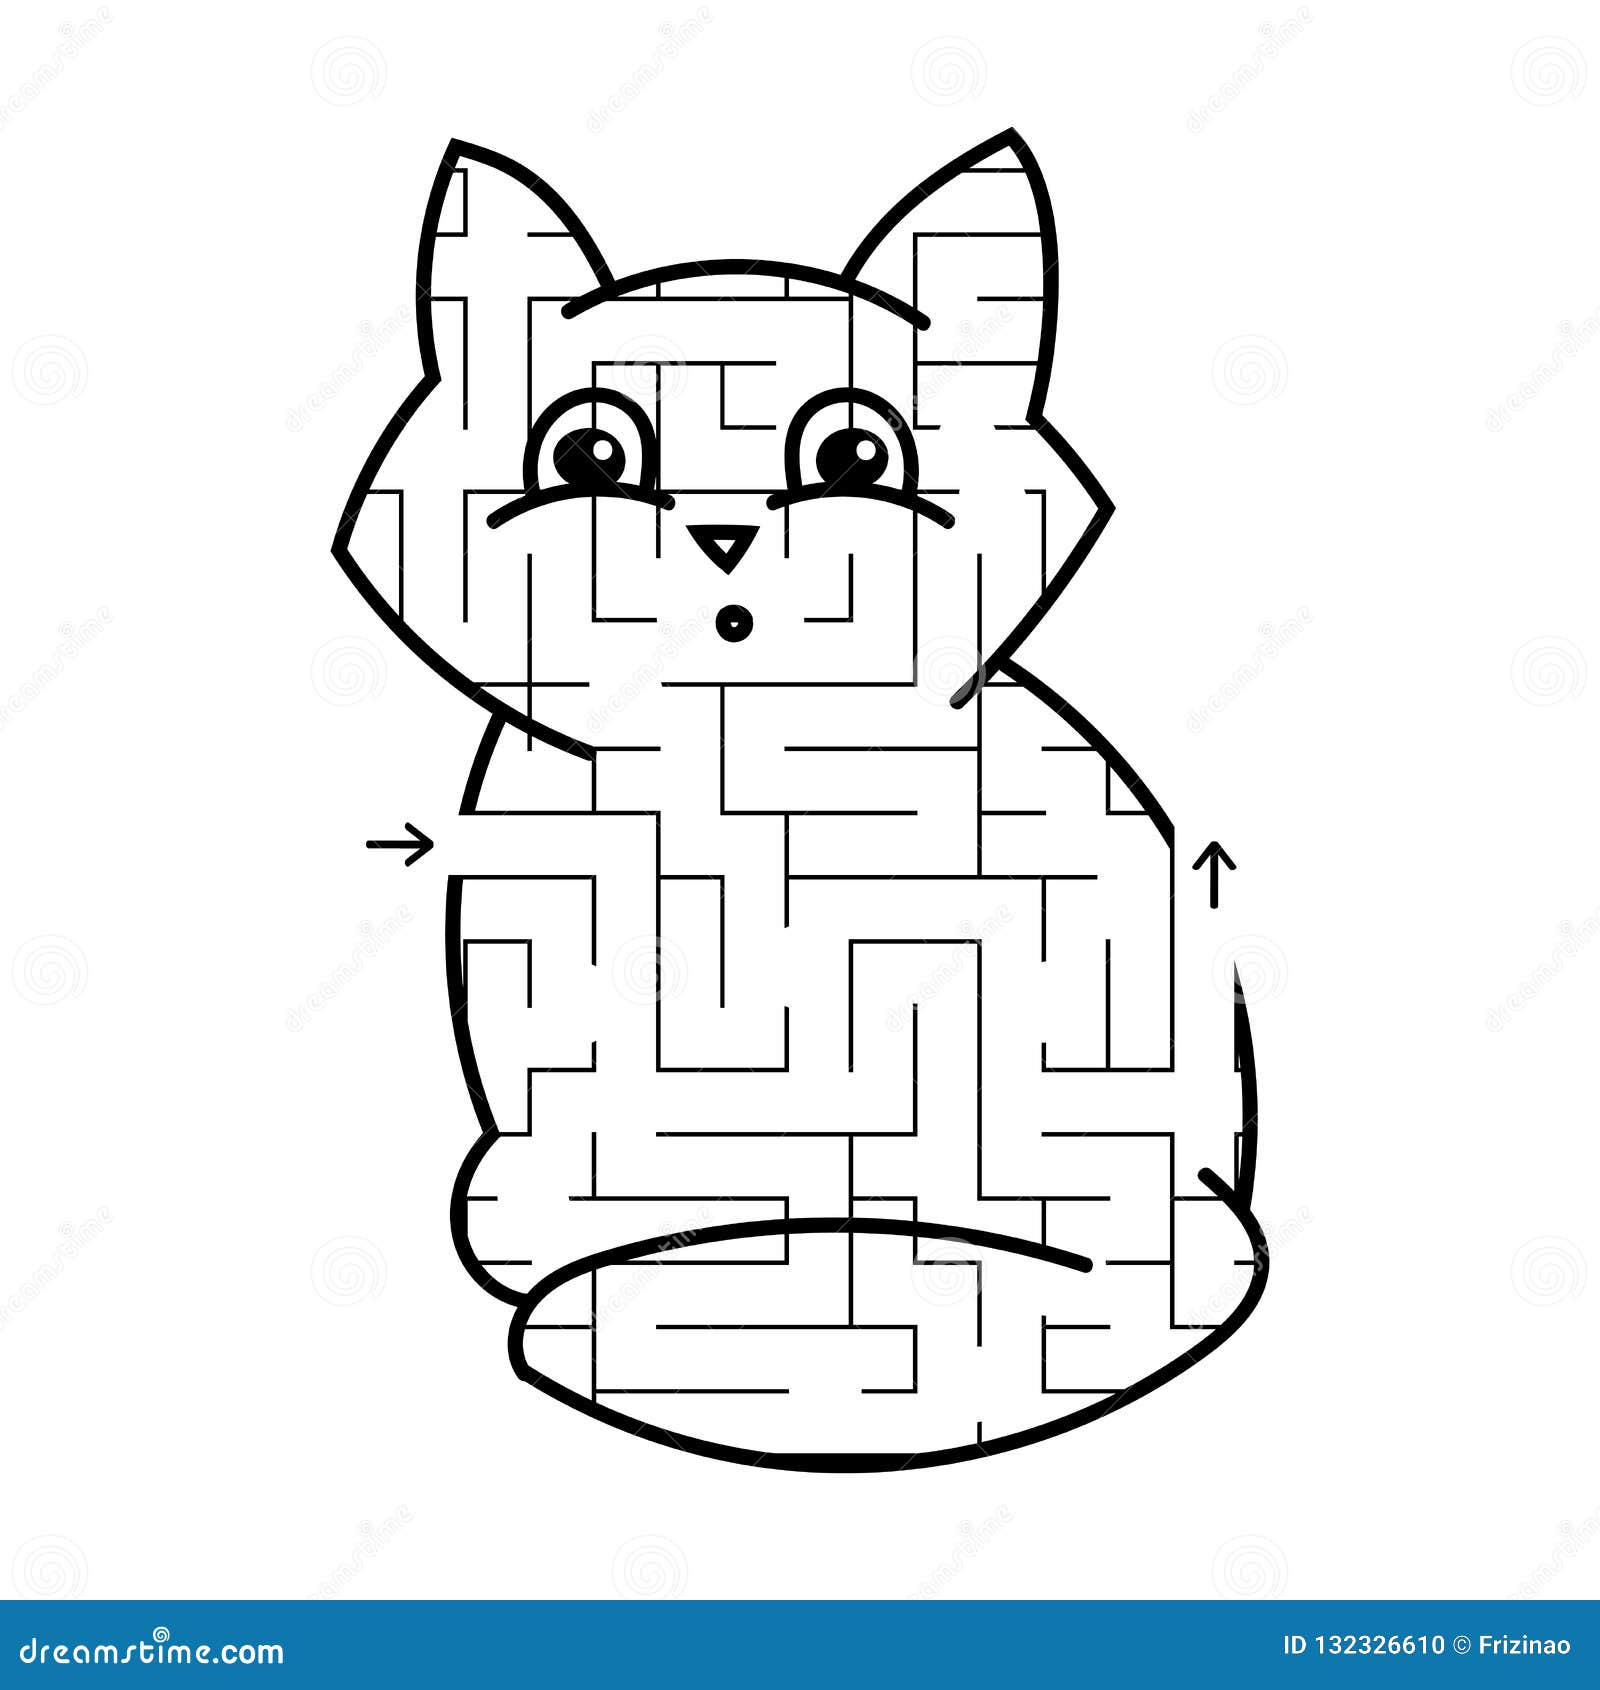 enigmo coloring pages